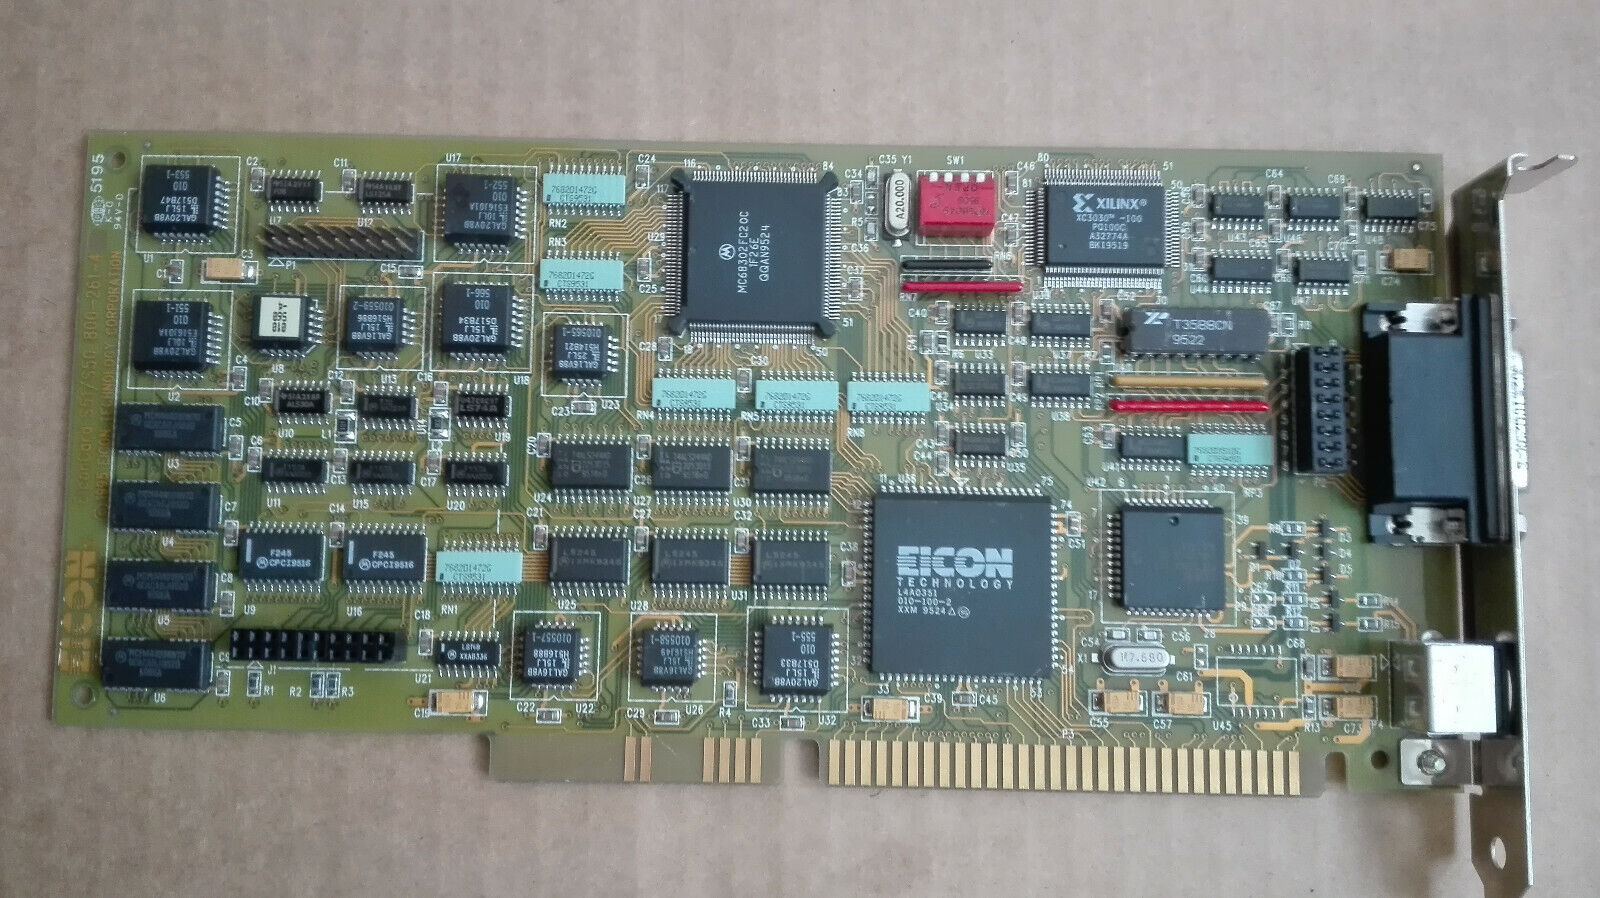 Eicon EiconCard S51/S50 800-261-4 ISA Card 030-120-80 made in Canada untested